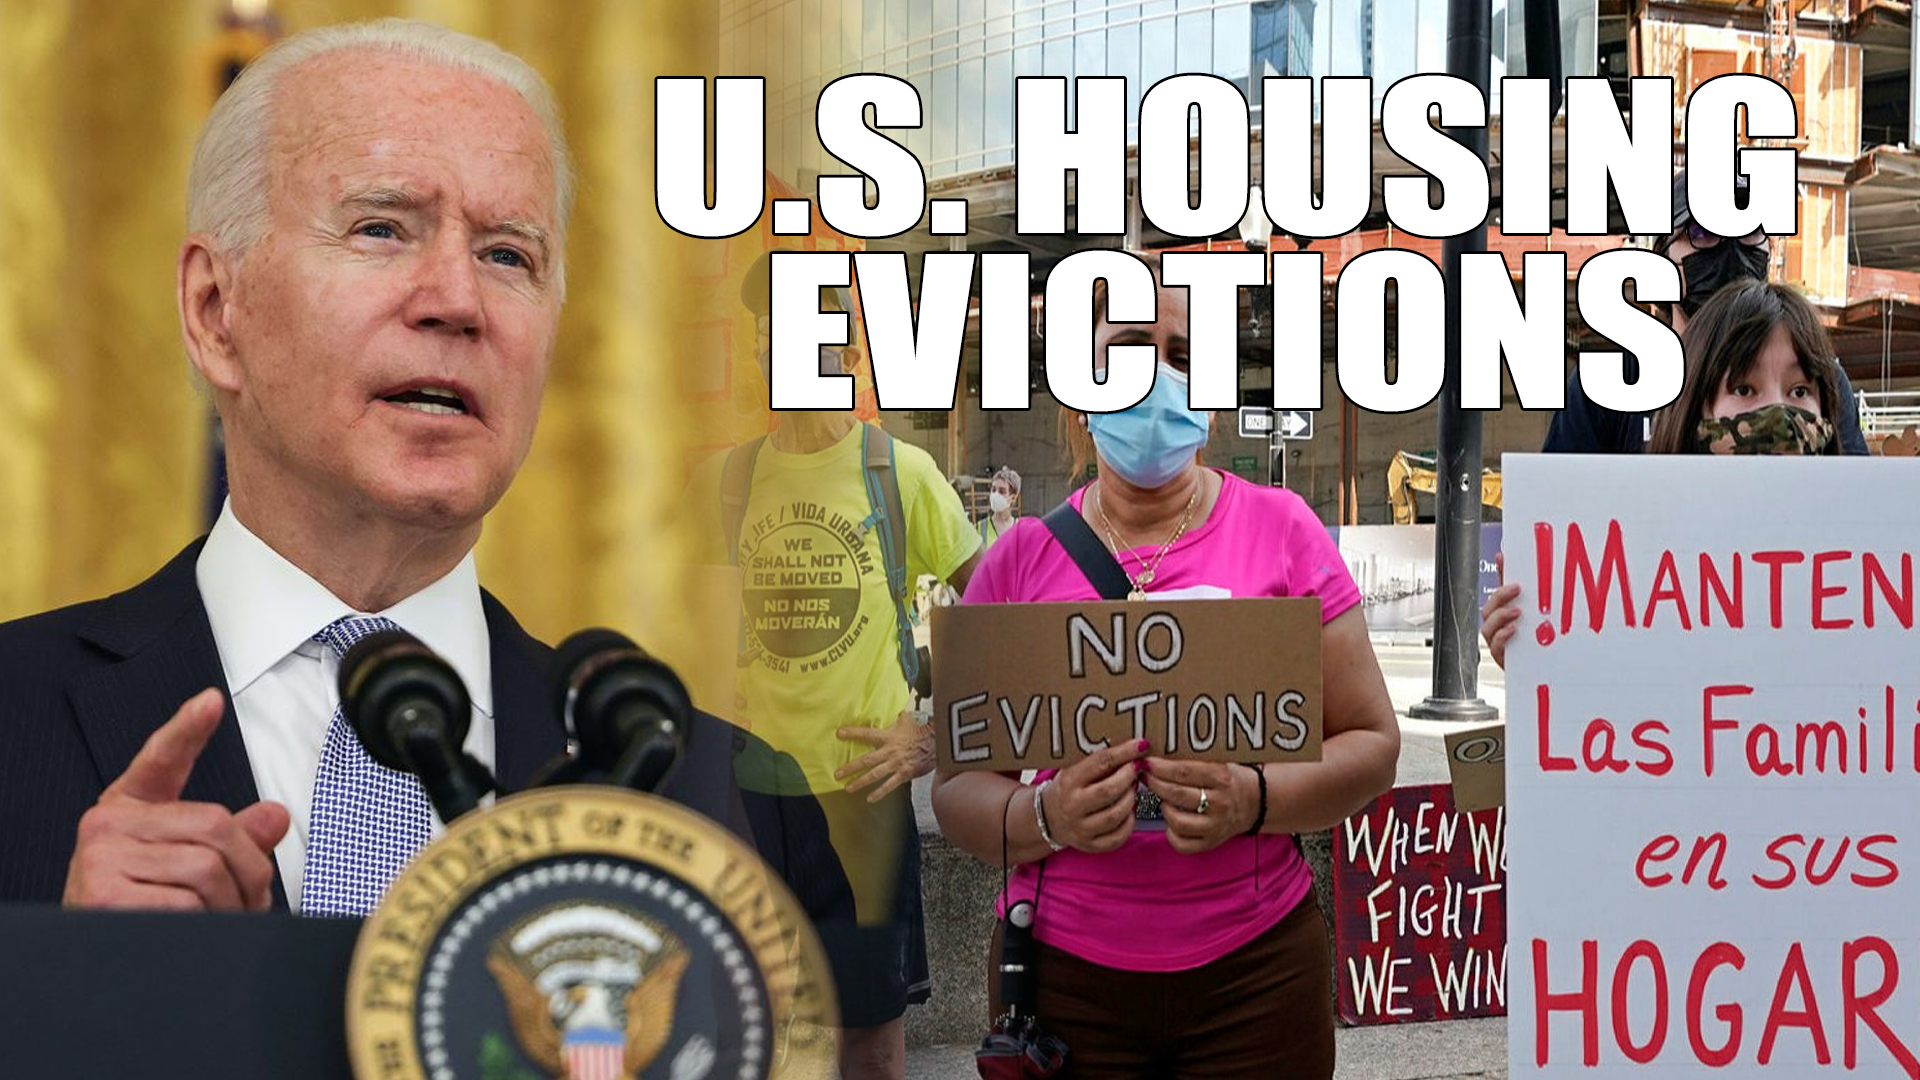 US eviction crisis: millions will be homeless